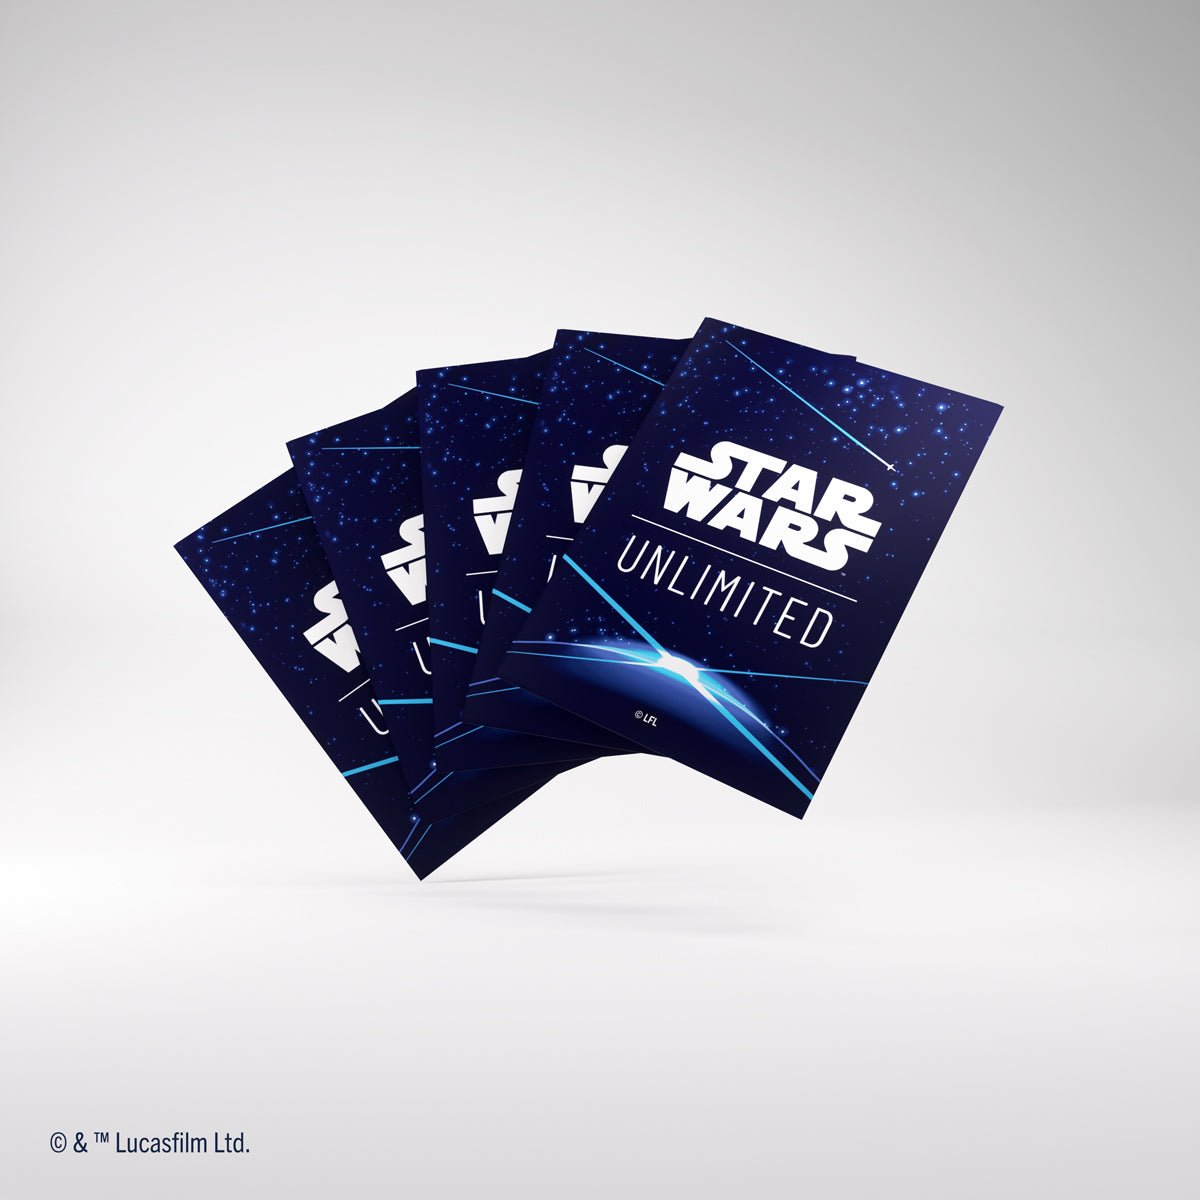 Gamegenic Star Wars: Unlimited Art Card Sleeves - Blue (60 Sleeves) [Colour Code: GREY]